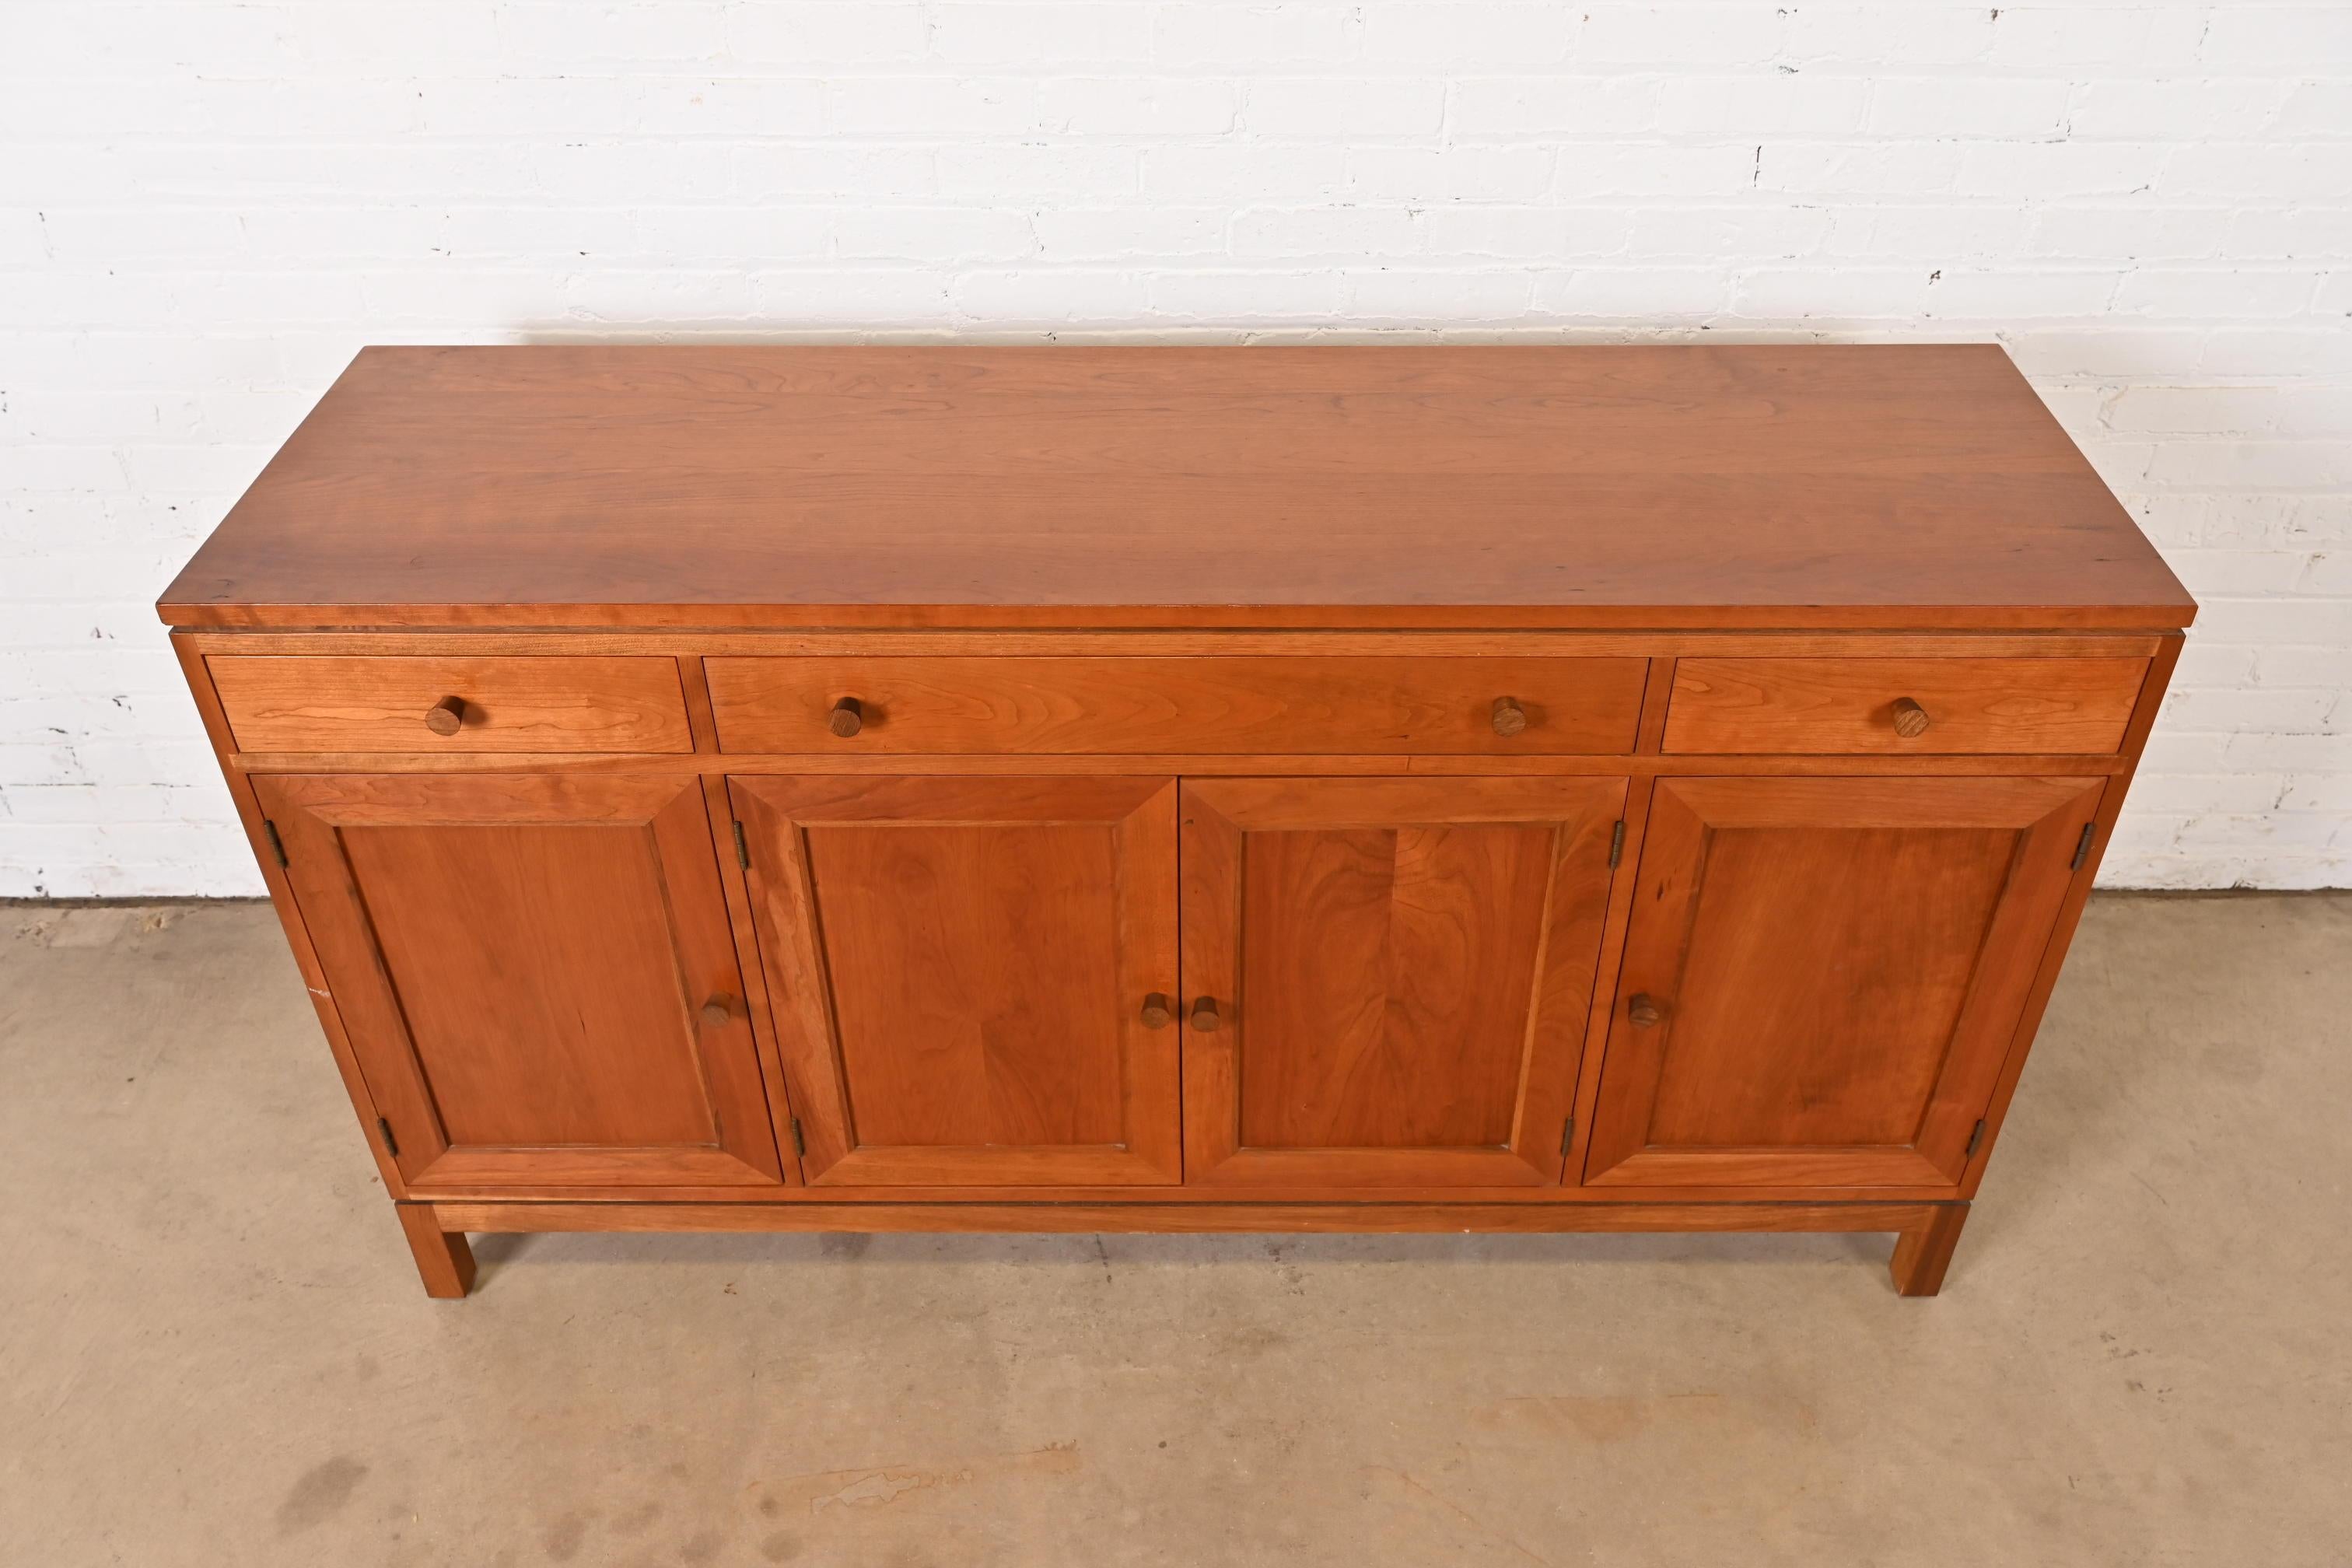 Stickley Arts & Crafts Shaker Cherry Wood Sideboard or Bar Cabinet For Sale 9